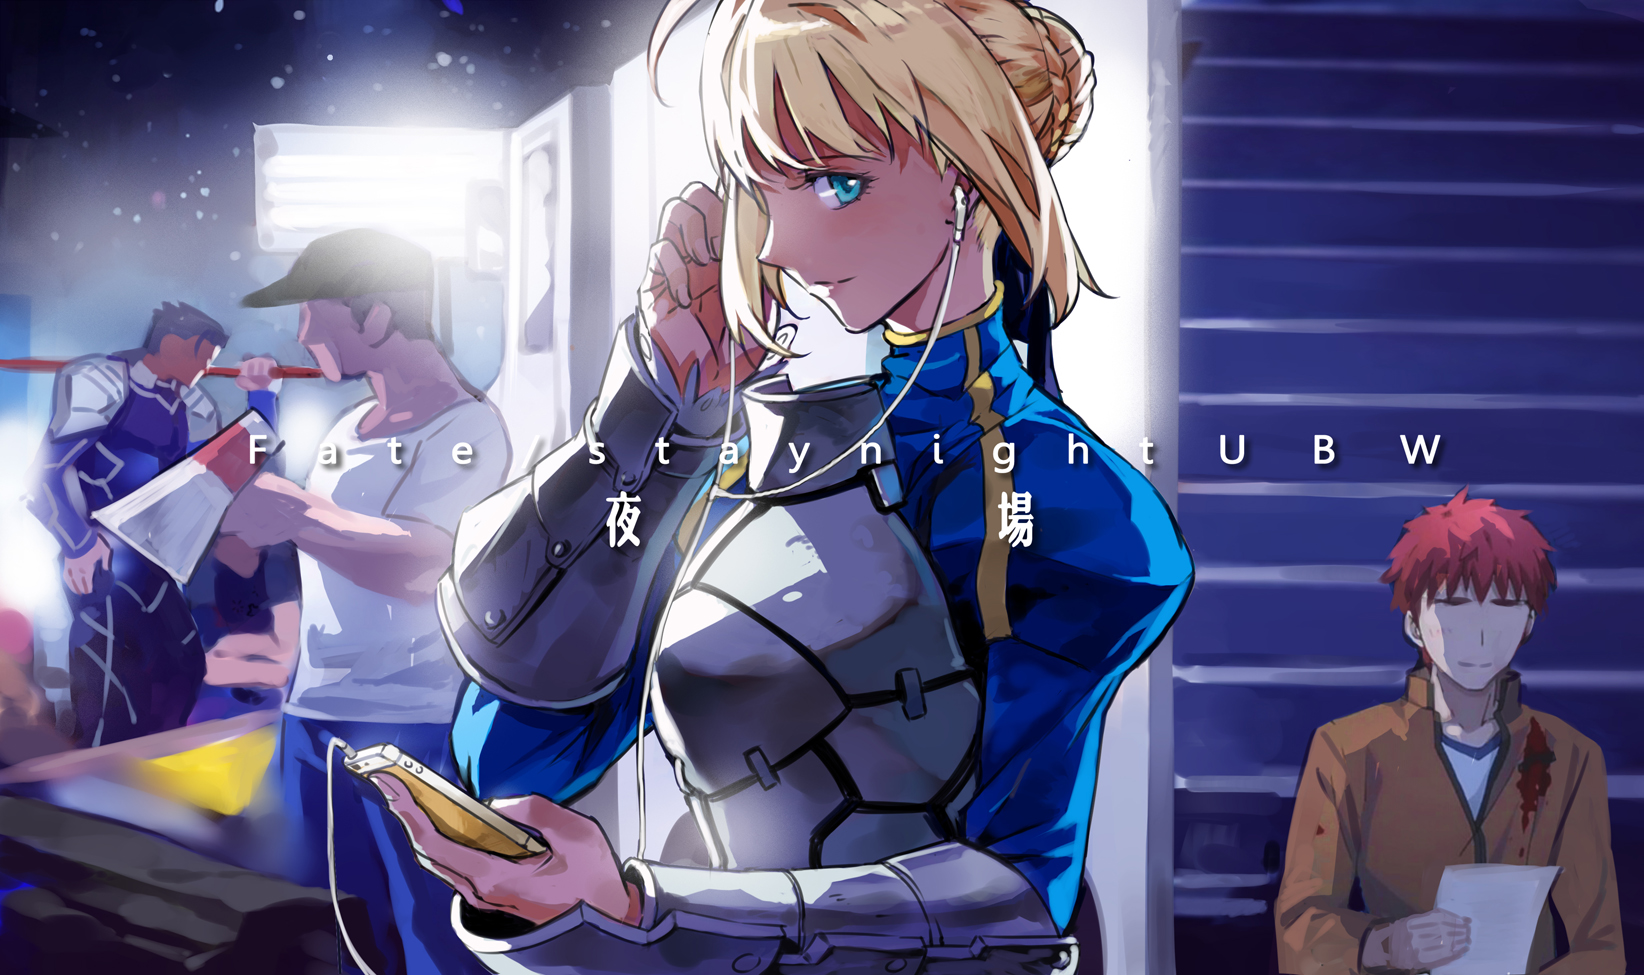 Fate Series Fate Stay Night Blond Hair Fantasy Armor Anime Girls Smiling Blue Eyes Saber Arturia Pen 1644x975